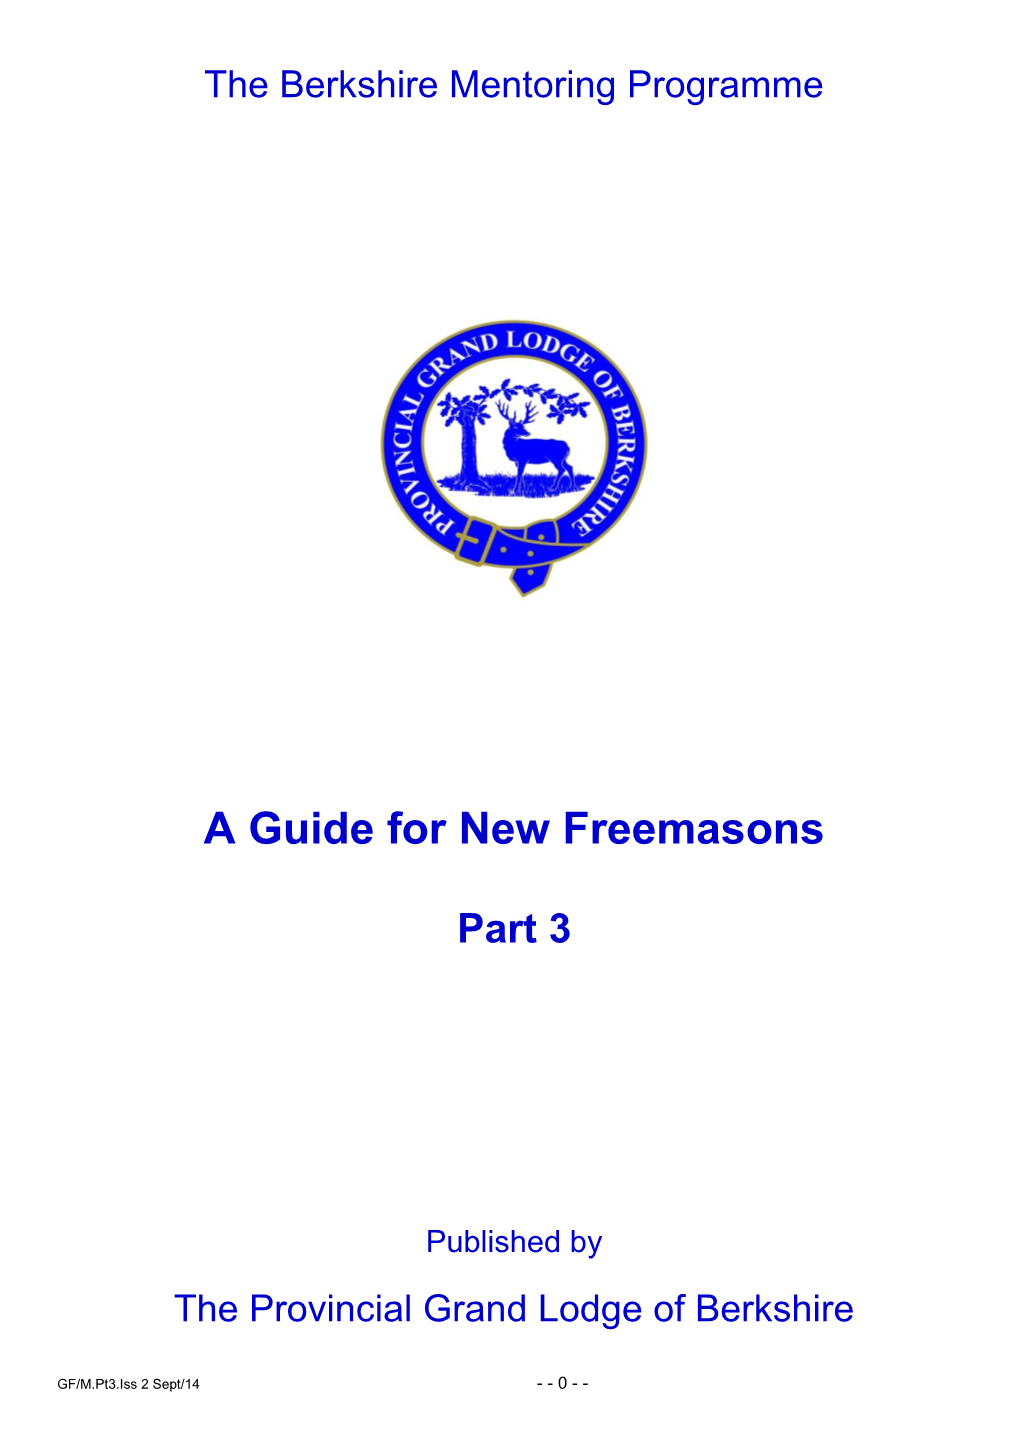 A Guide for New Freemasons